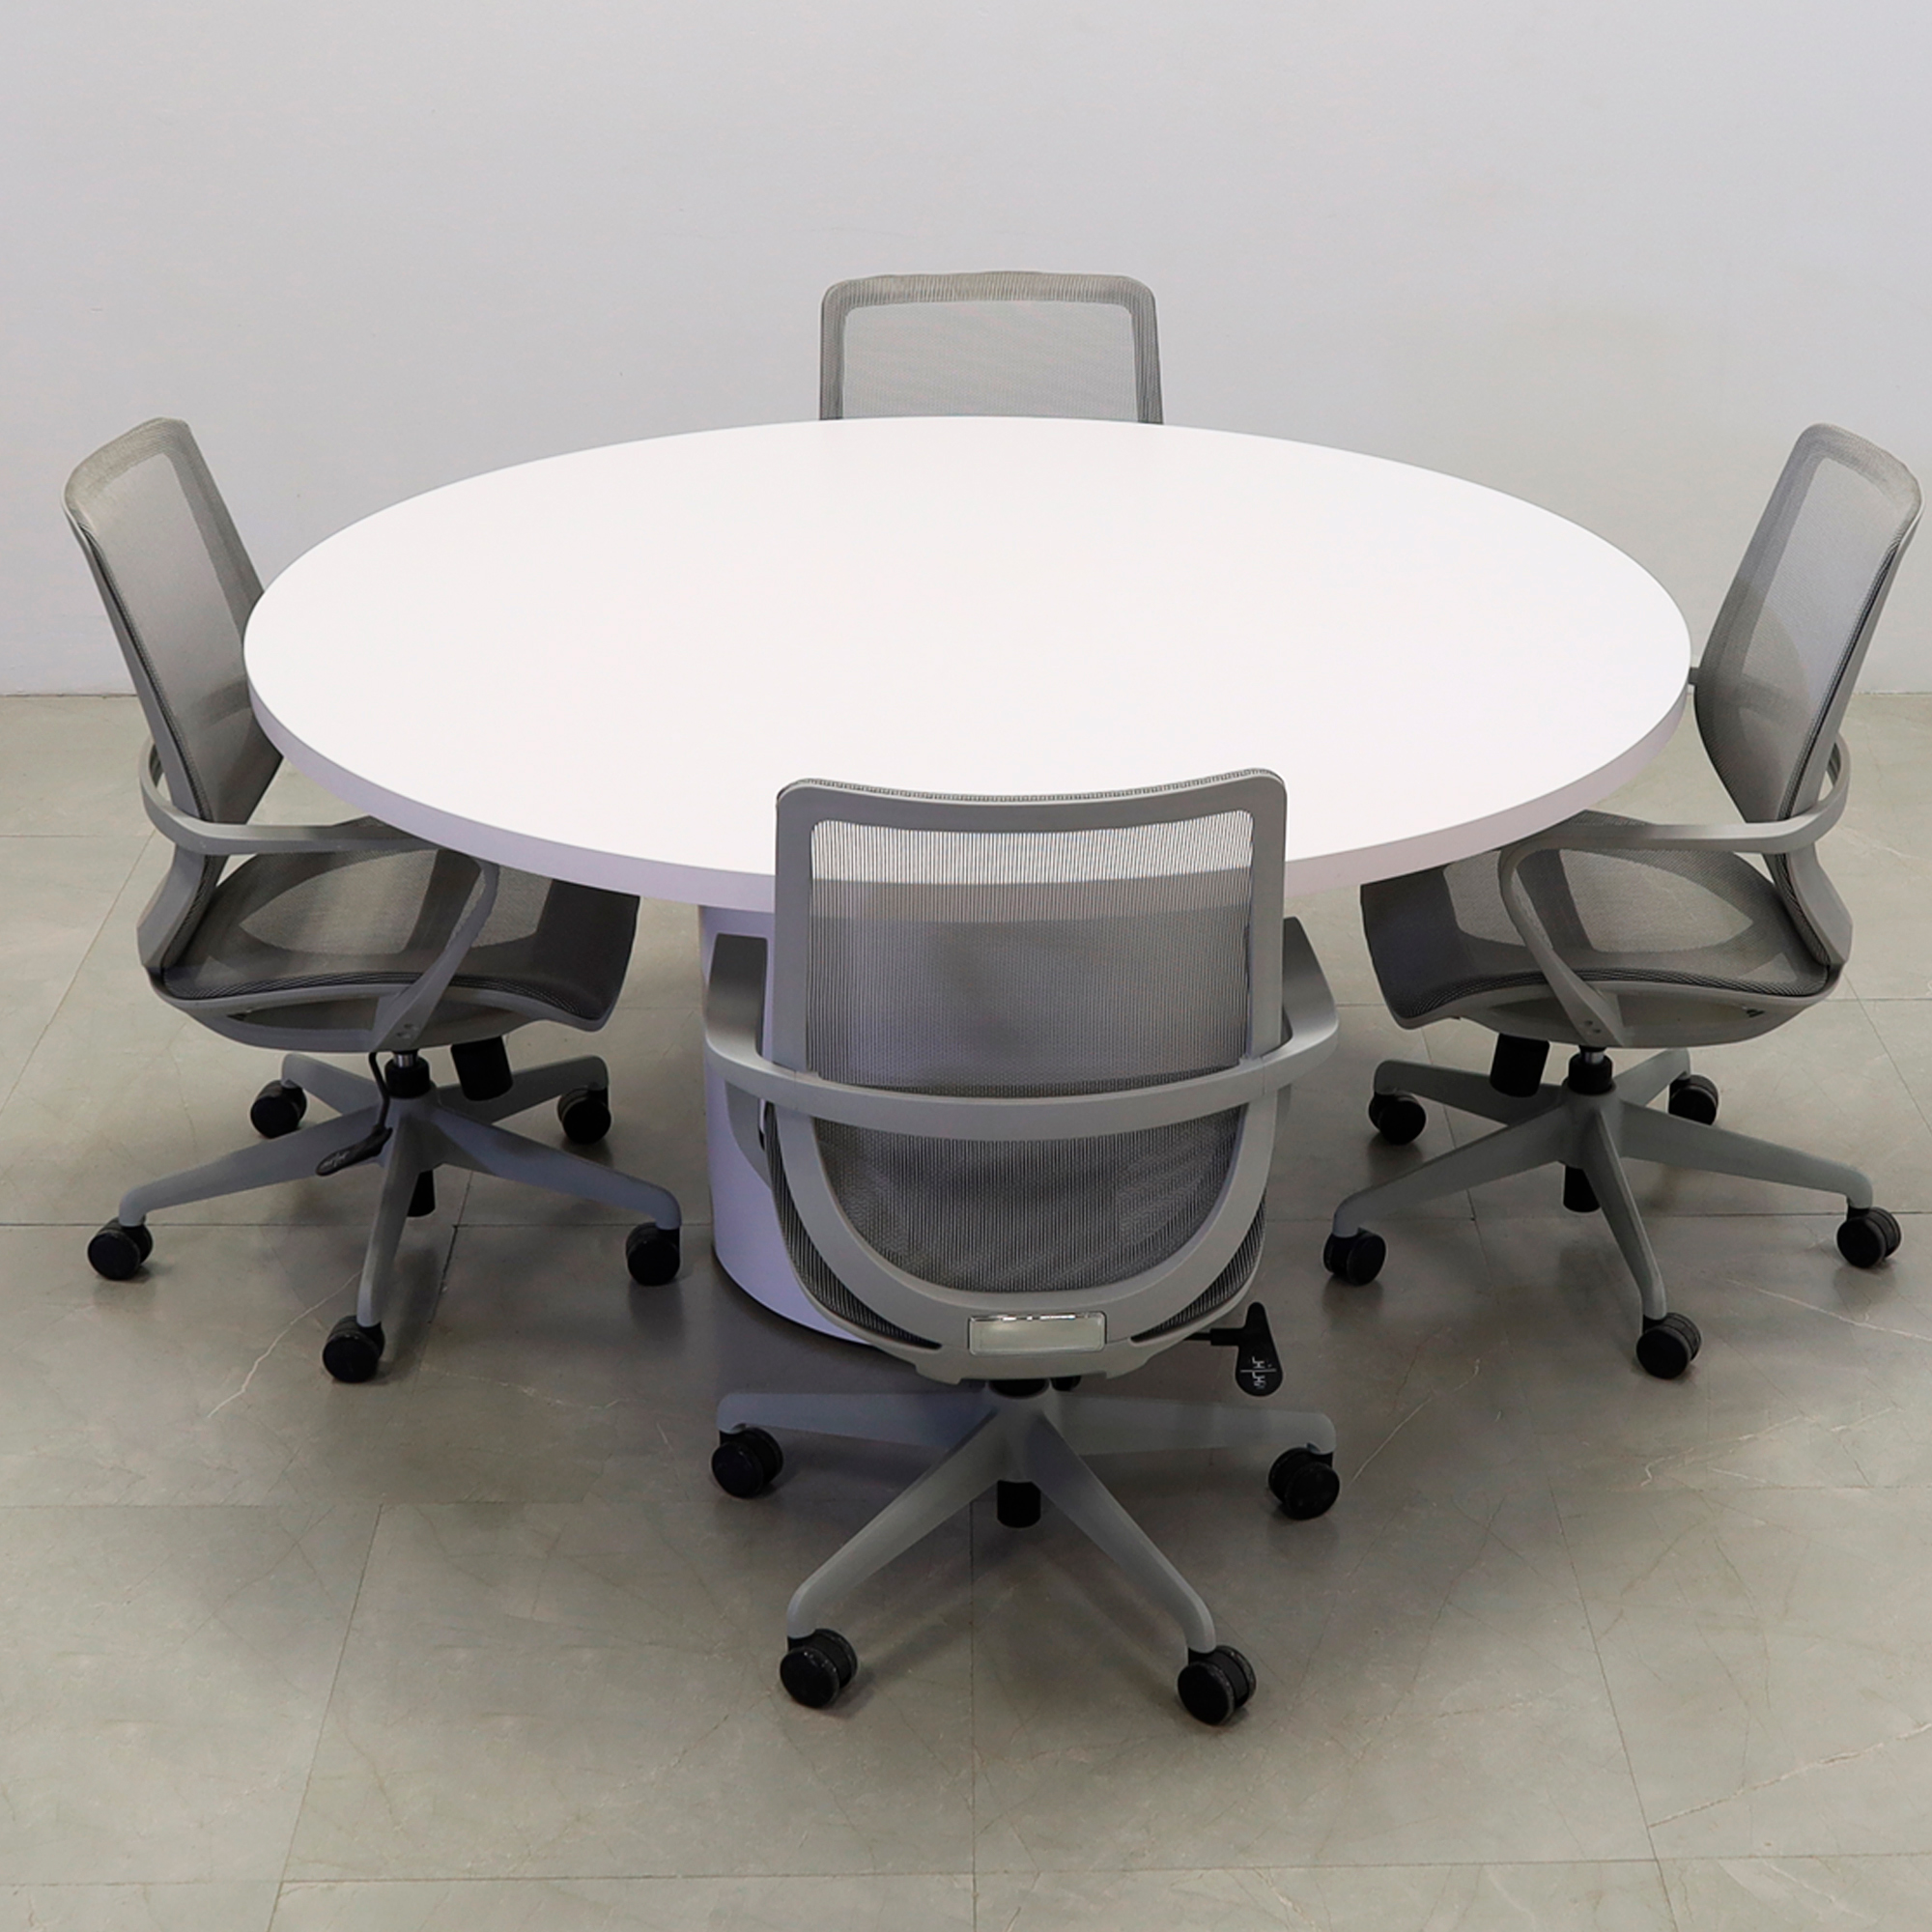 60-inch Newton Round Conference Table in white matte laminate top & base, shown here.